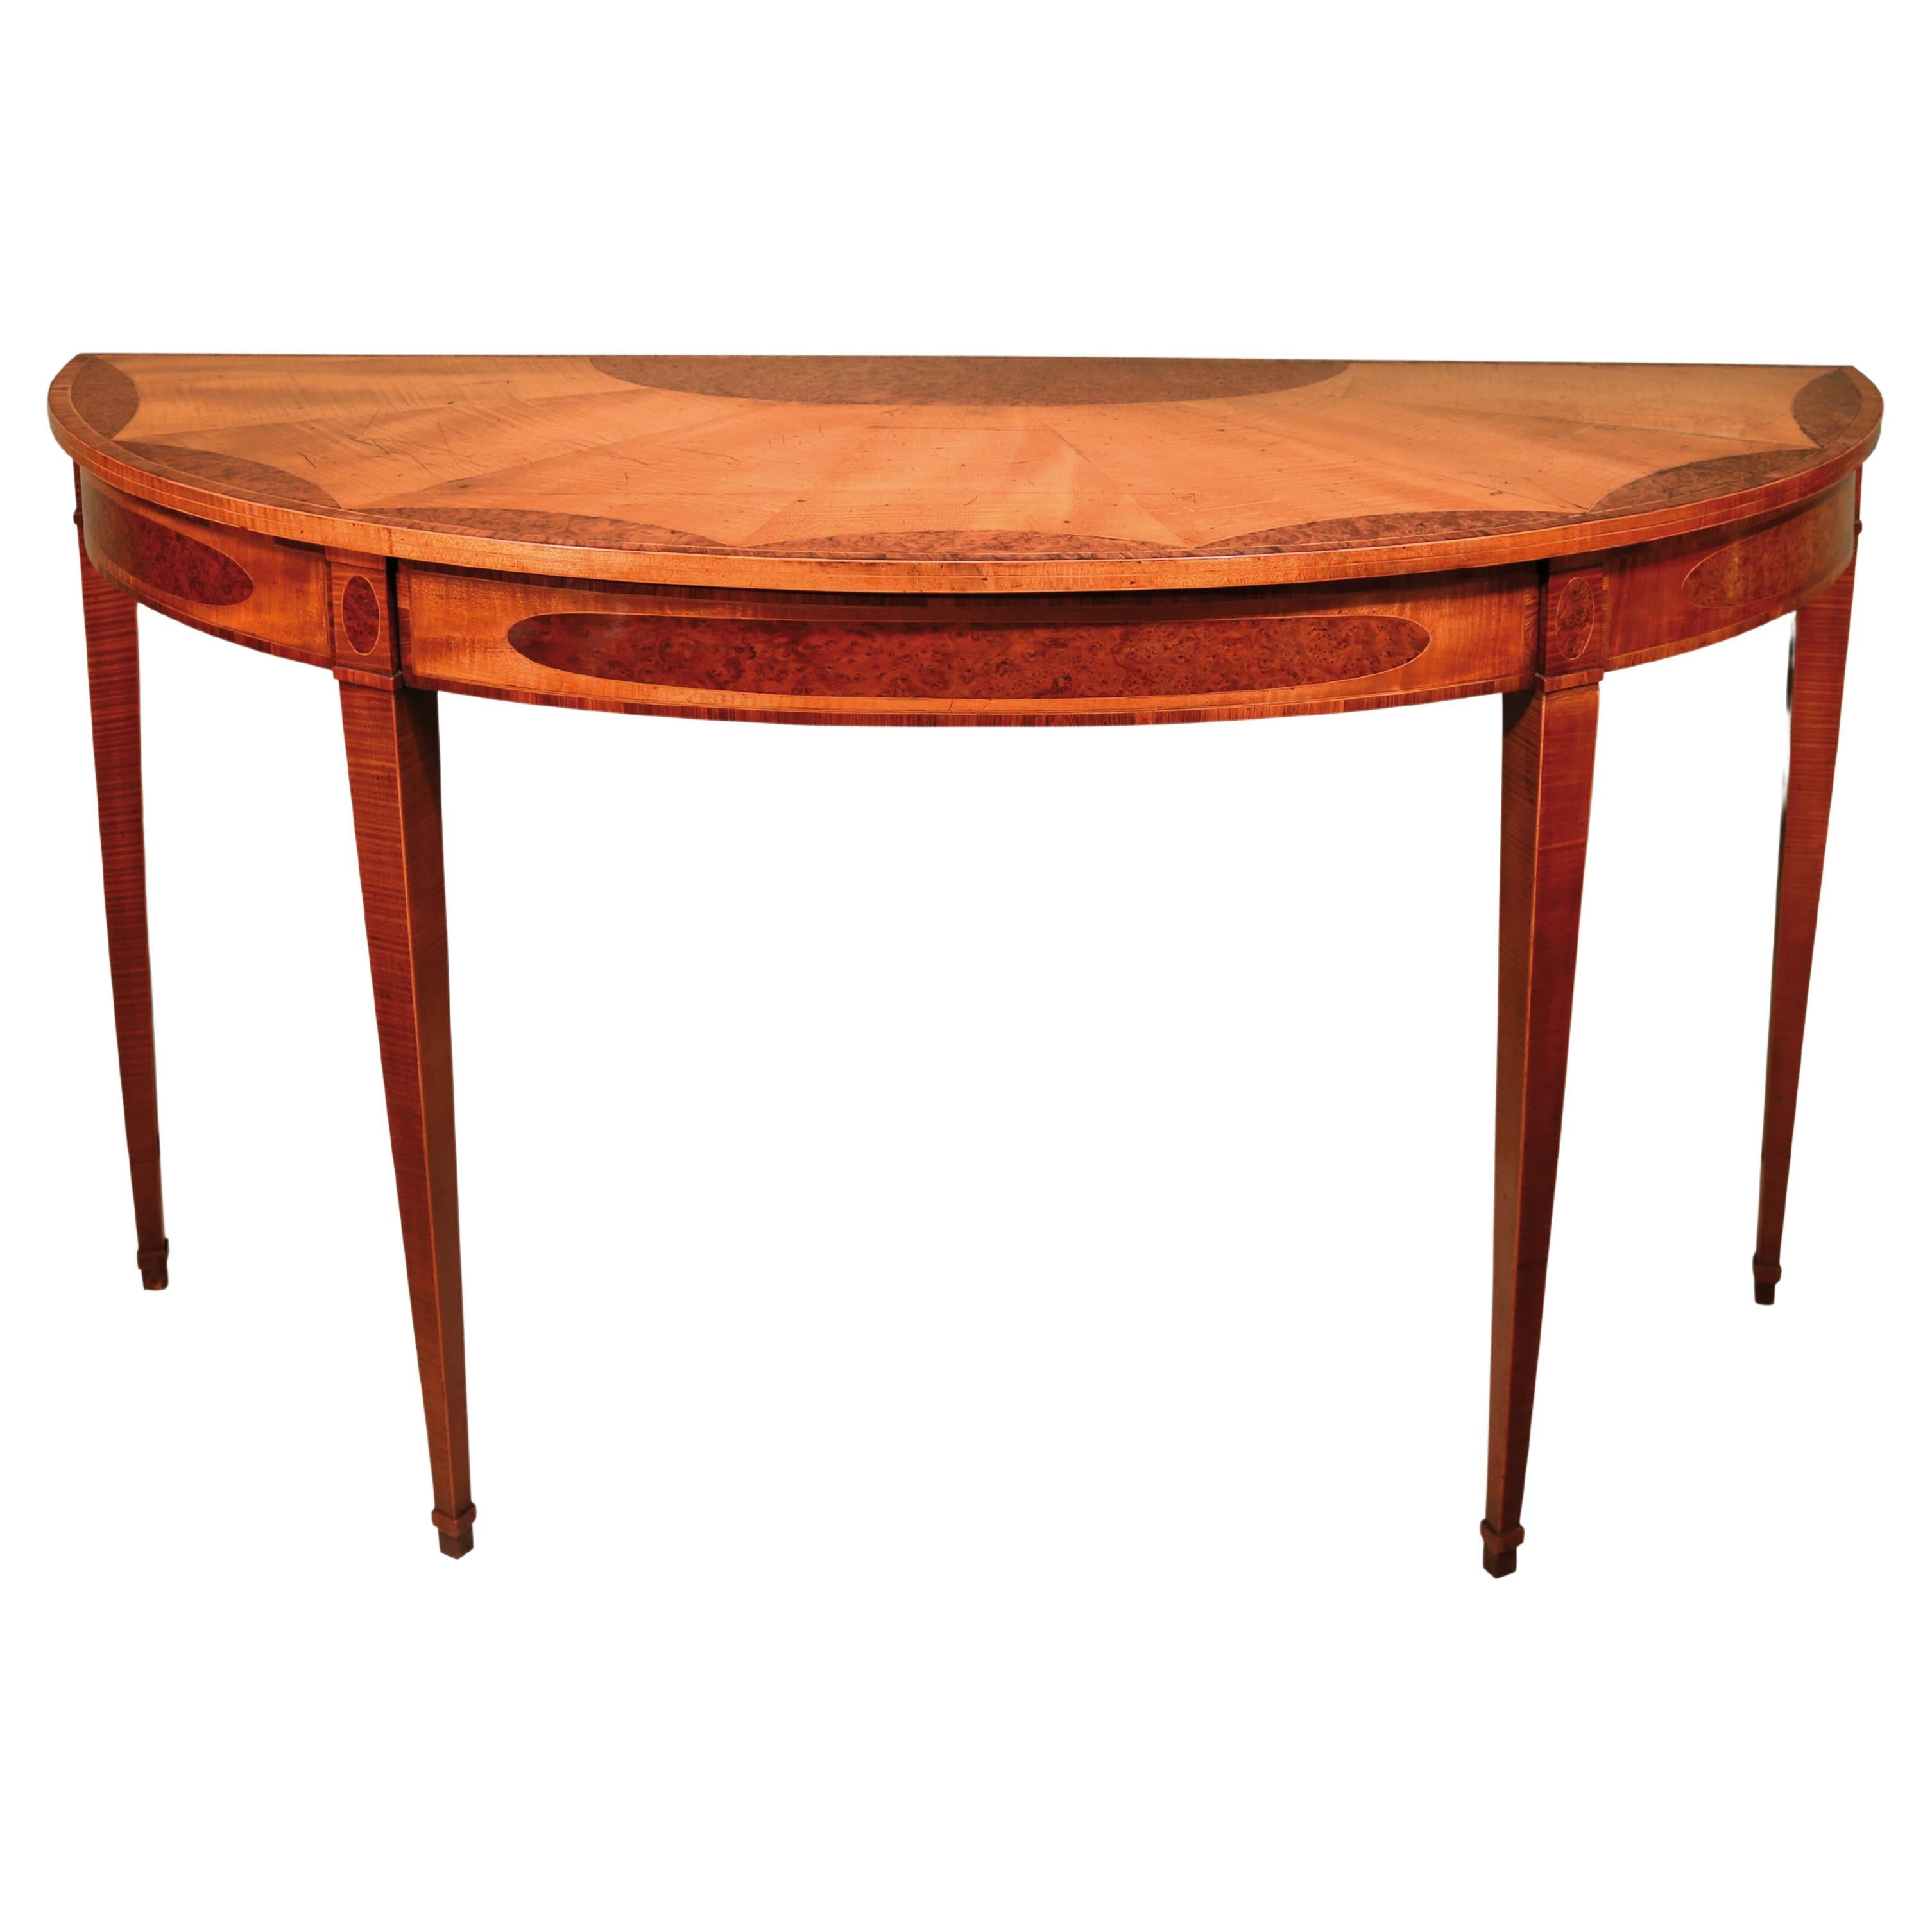 Sheraton Period Satinwood Demilune Console Table